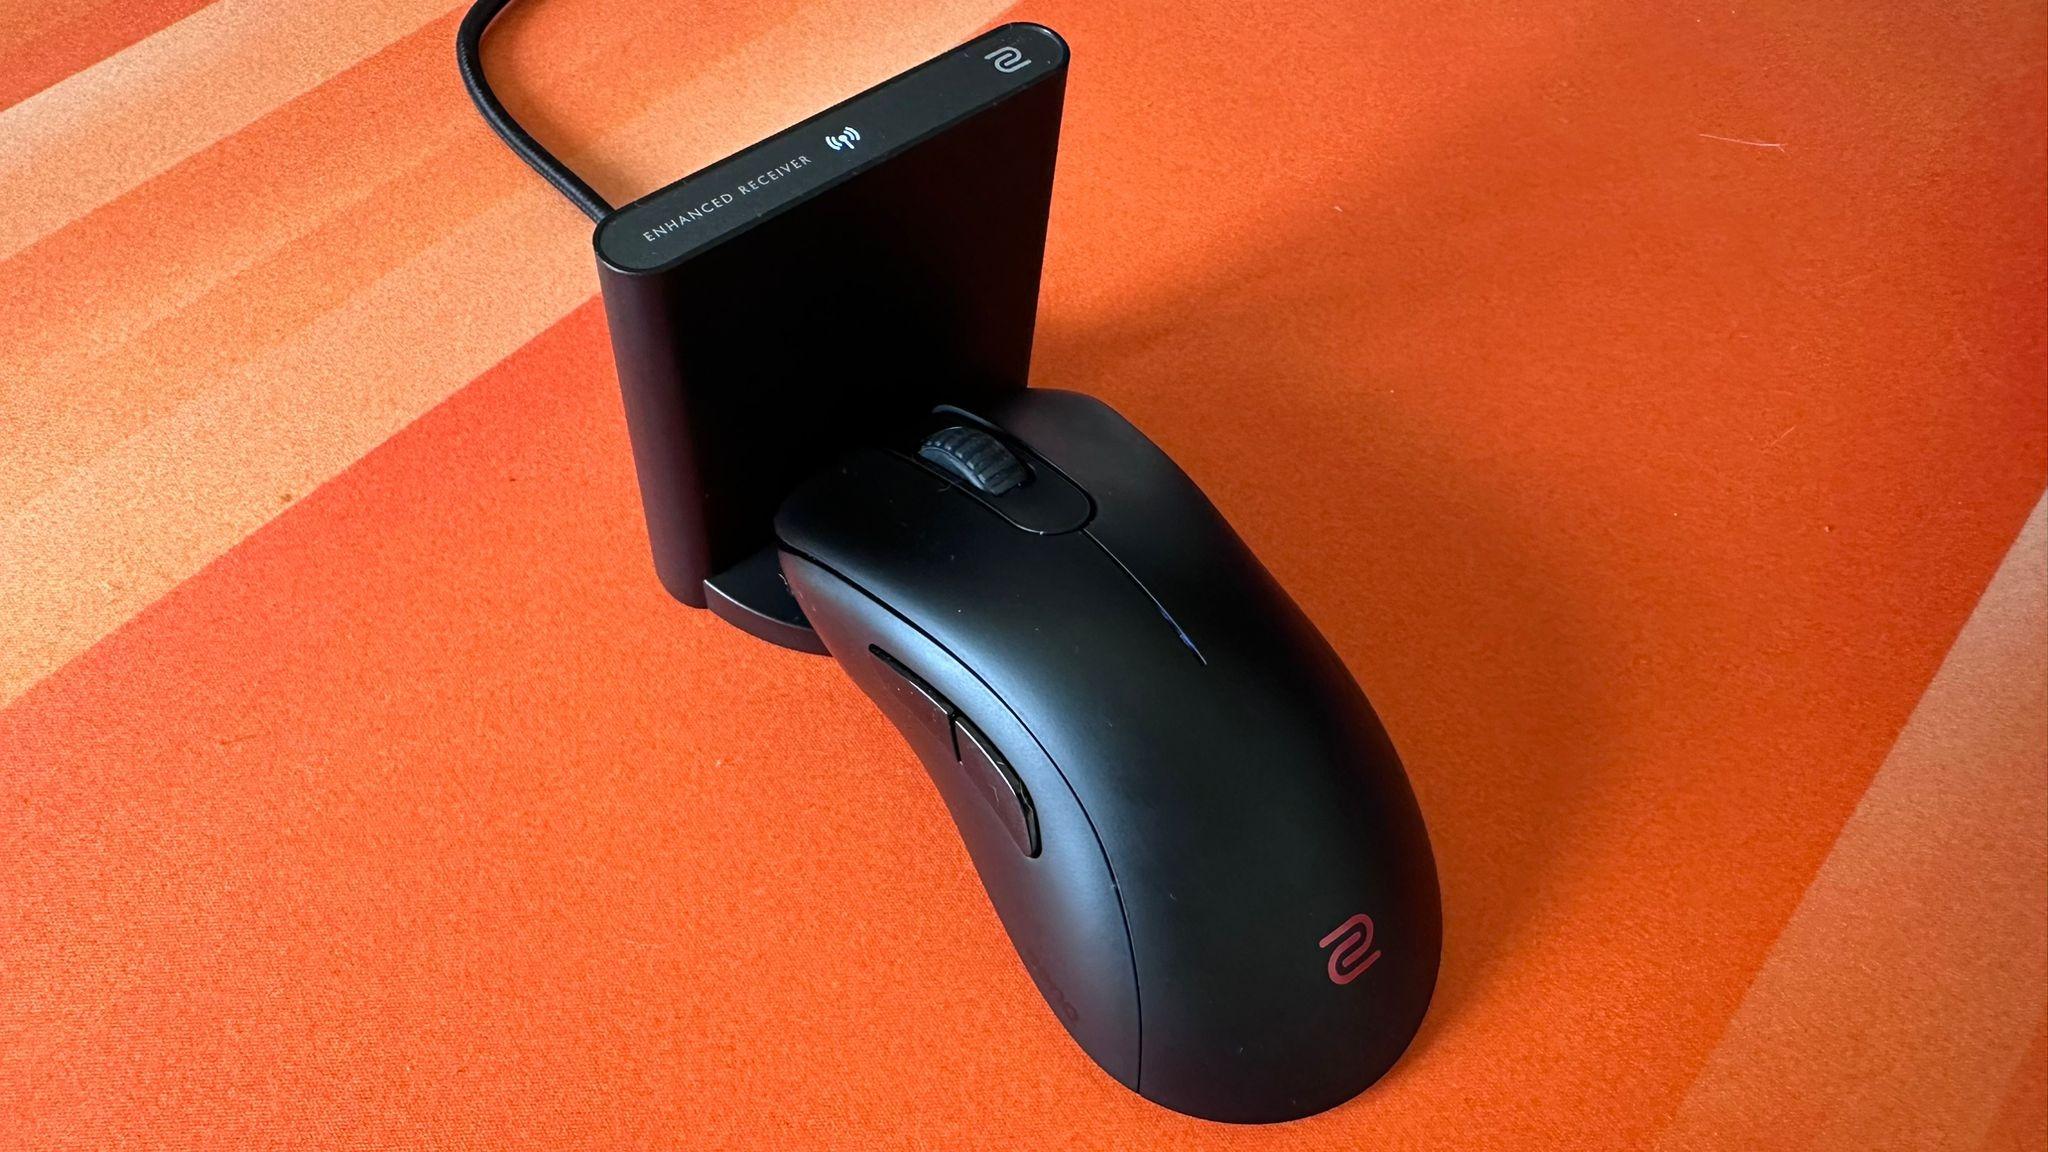 Zowie Mouse on charger